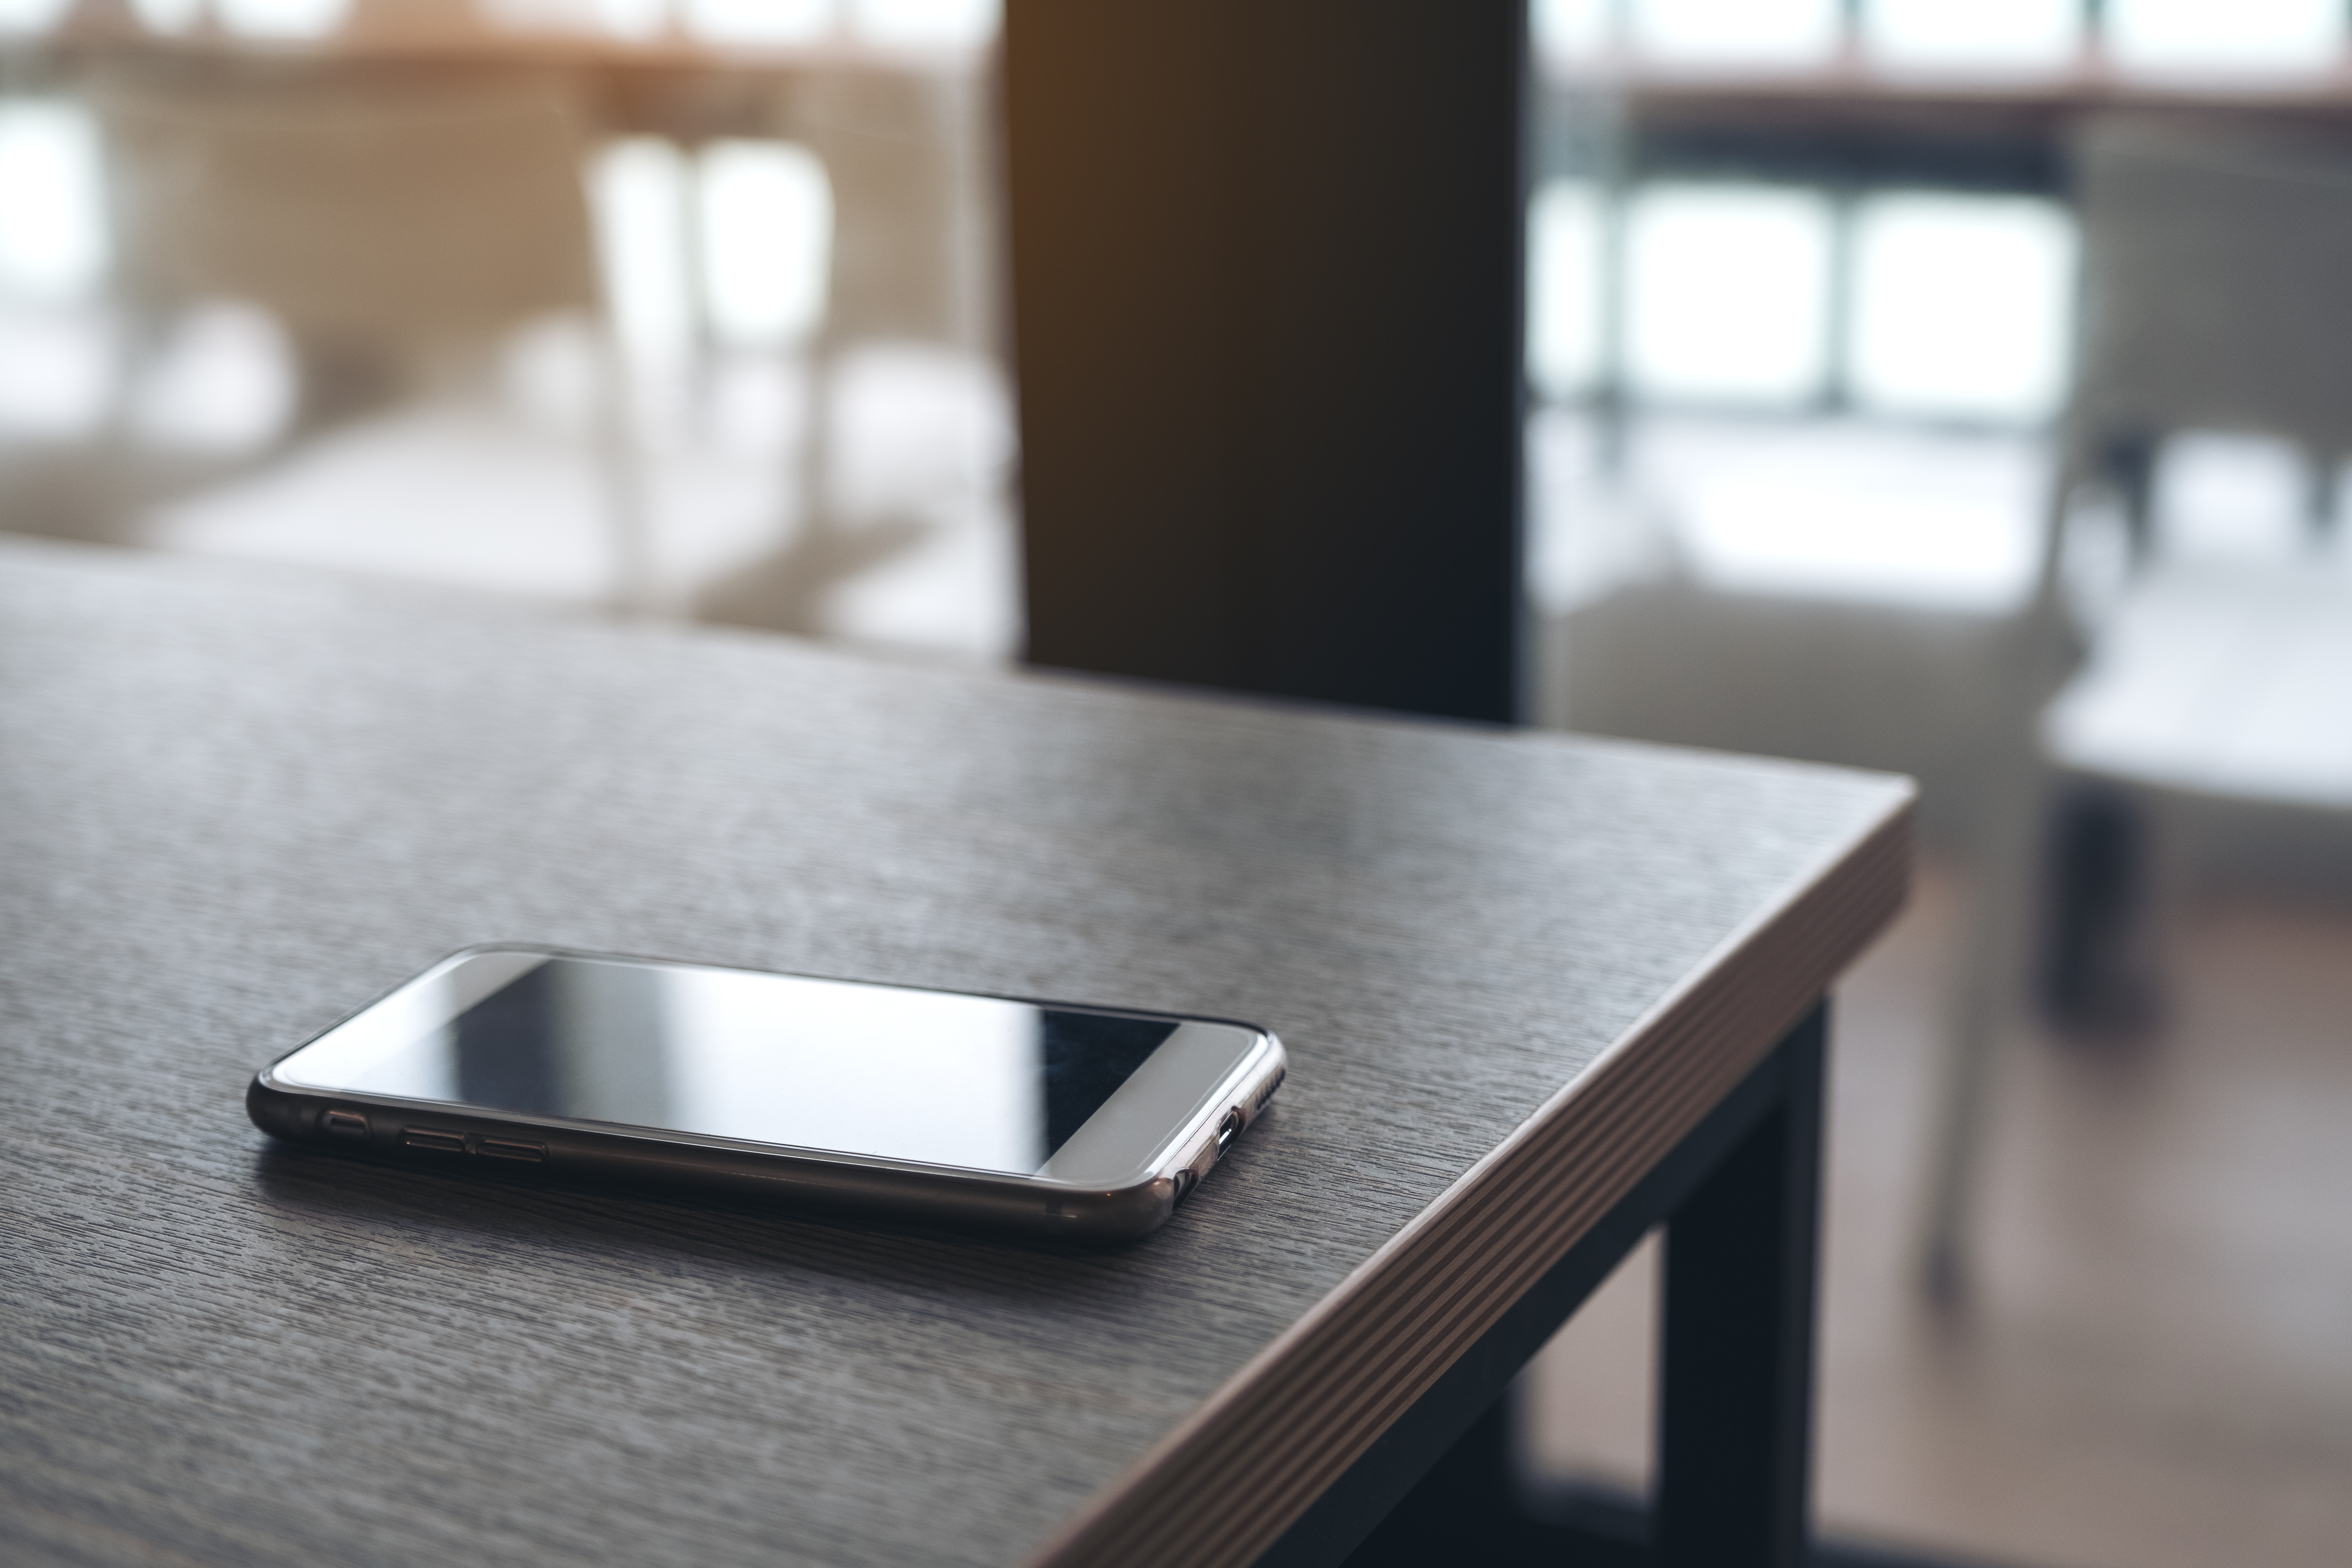 A single mobile phone on wooden table. | Source: Shutterstock